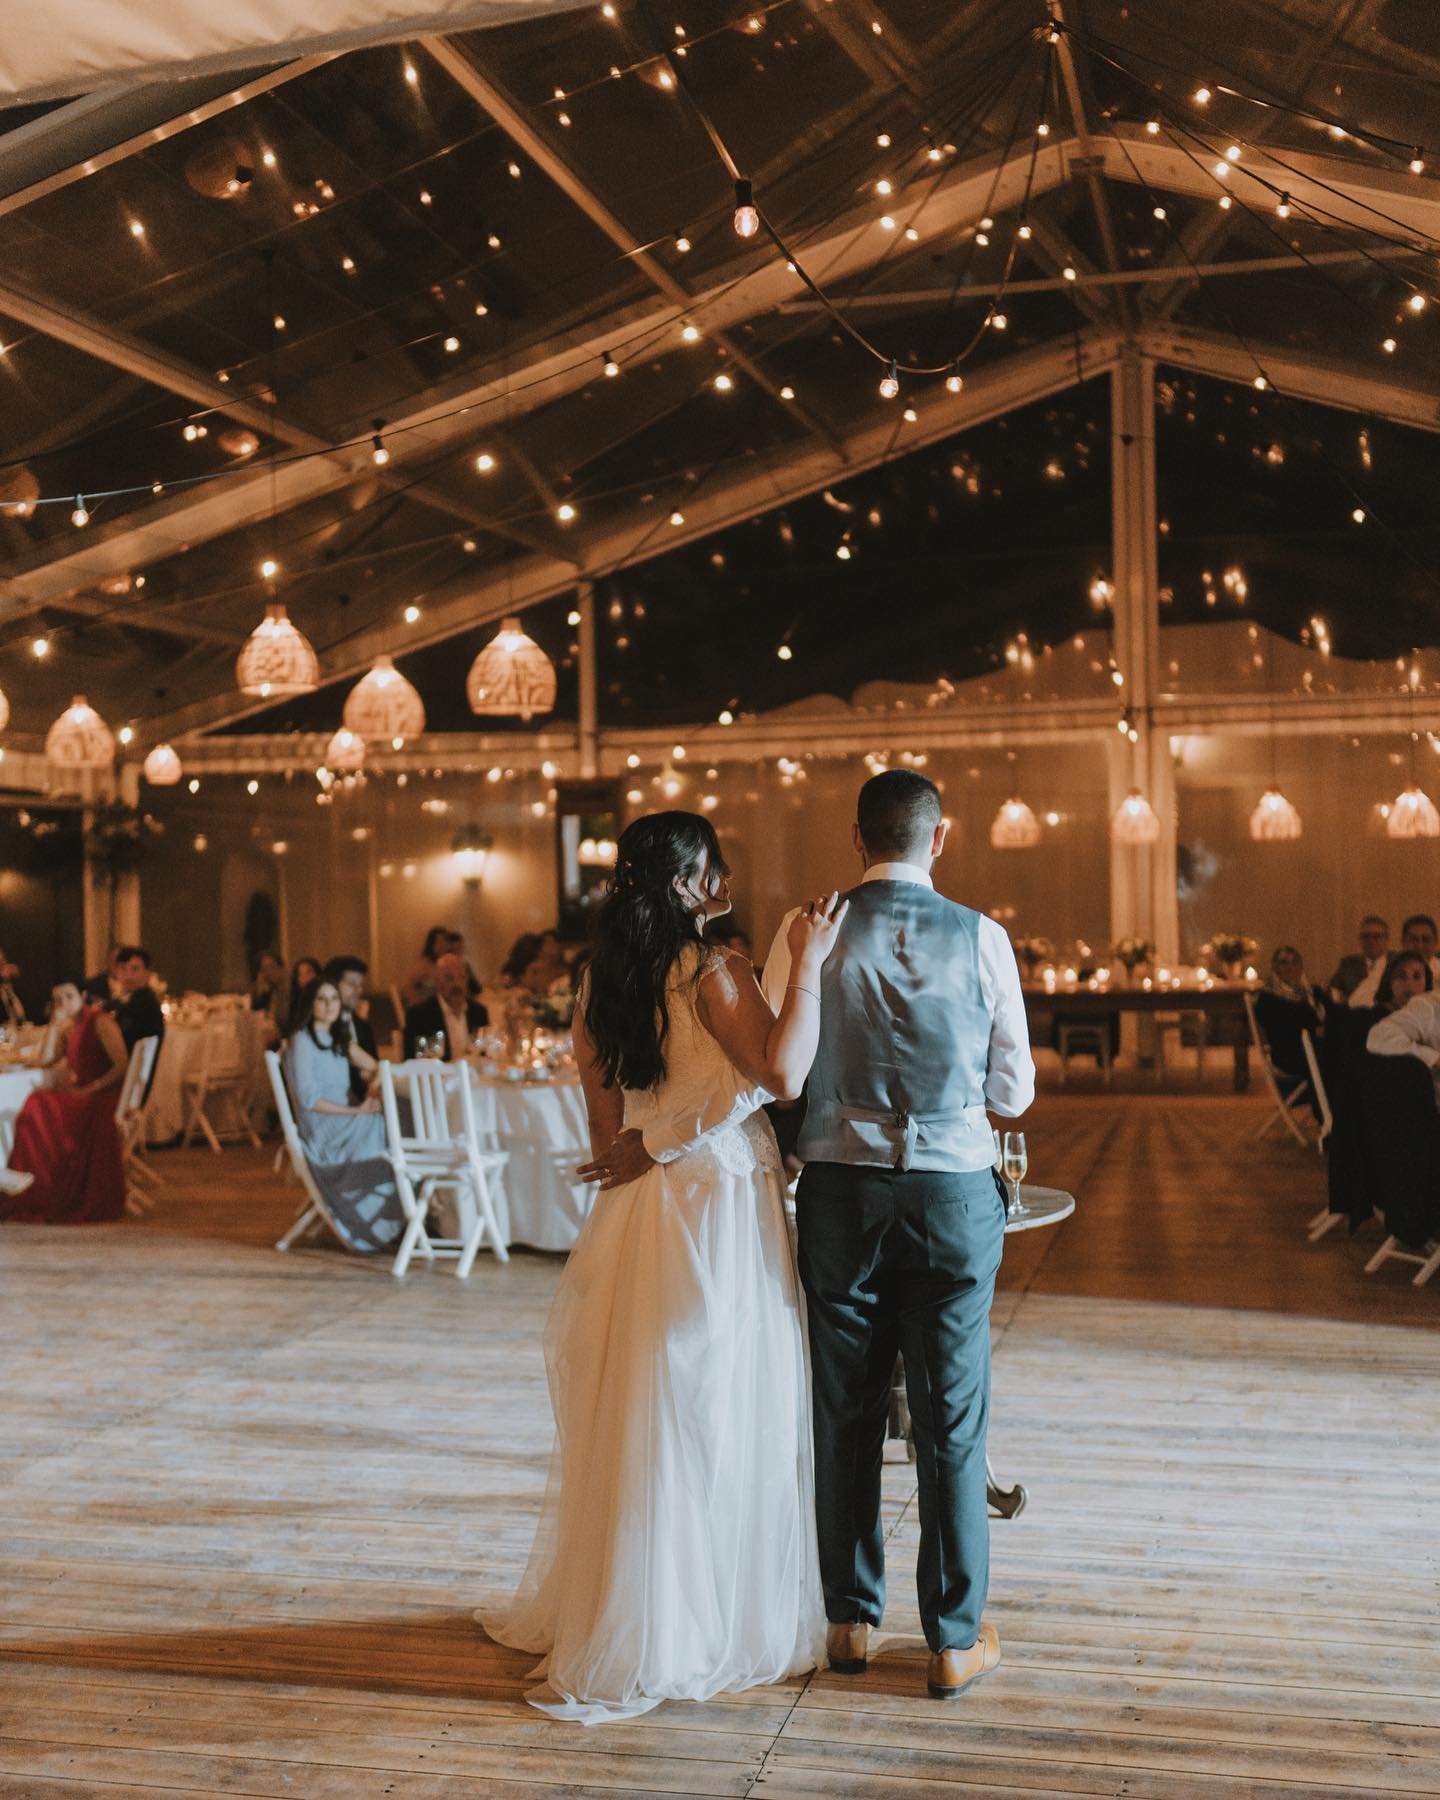 This post is on the subject of side-by-side. There are couples who, when they get married, spend a lot of the wedding talking to the guests, not always together, often apart. They&rsquo;re not always physically side-by-side, but the day is about that